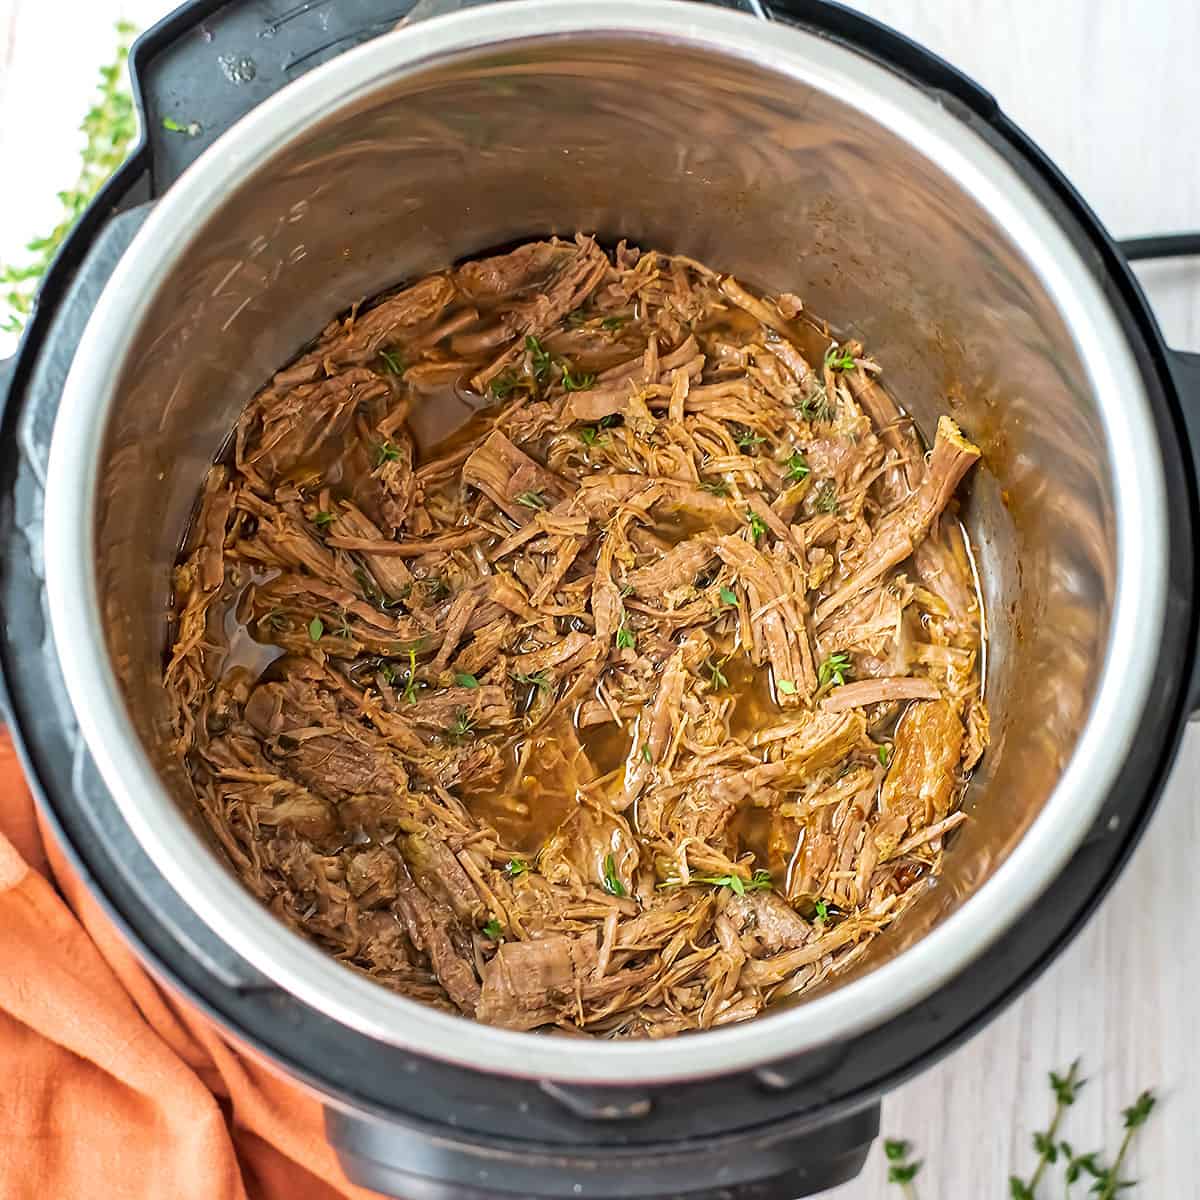 Shredded beef in instant pot.